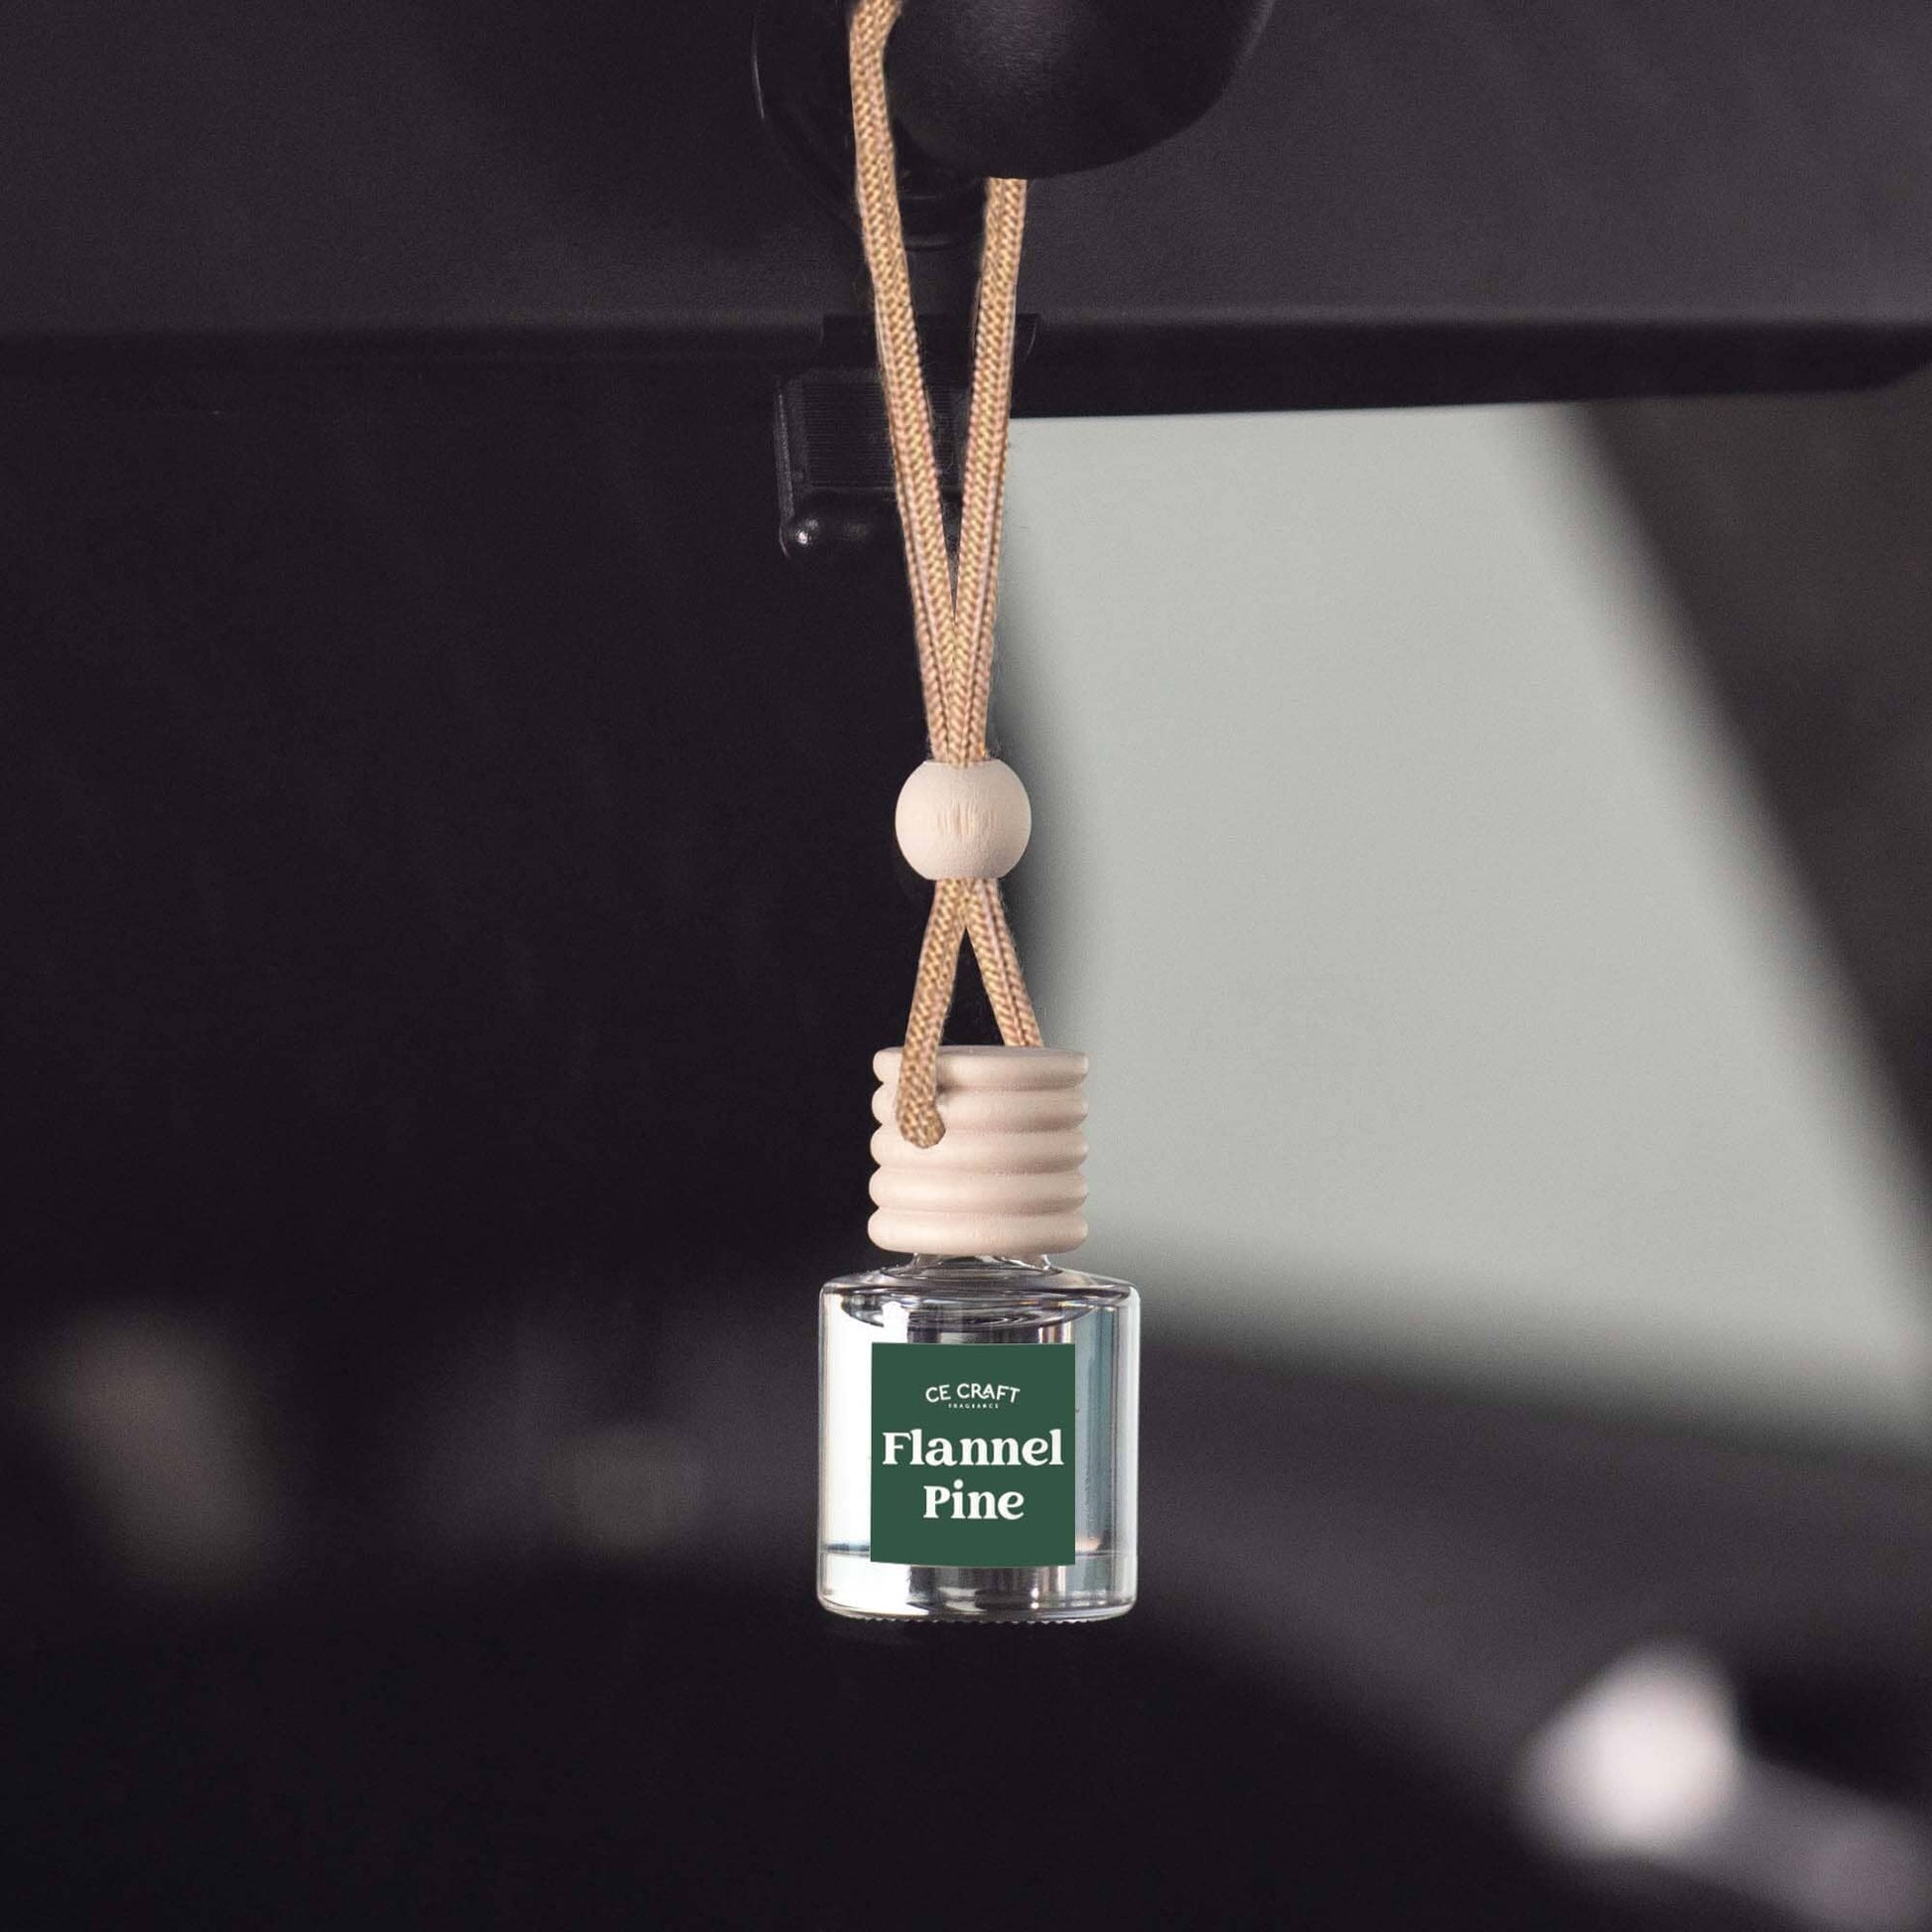 Scented Car Freshener - Car Air Freshener Diffuser - Last 60+ Days Vehicle Air Fresheners CE Craft Flannel Pine 